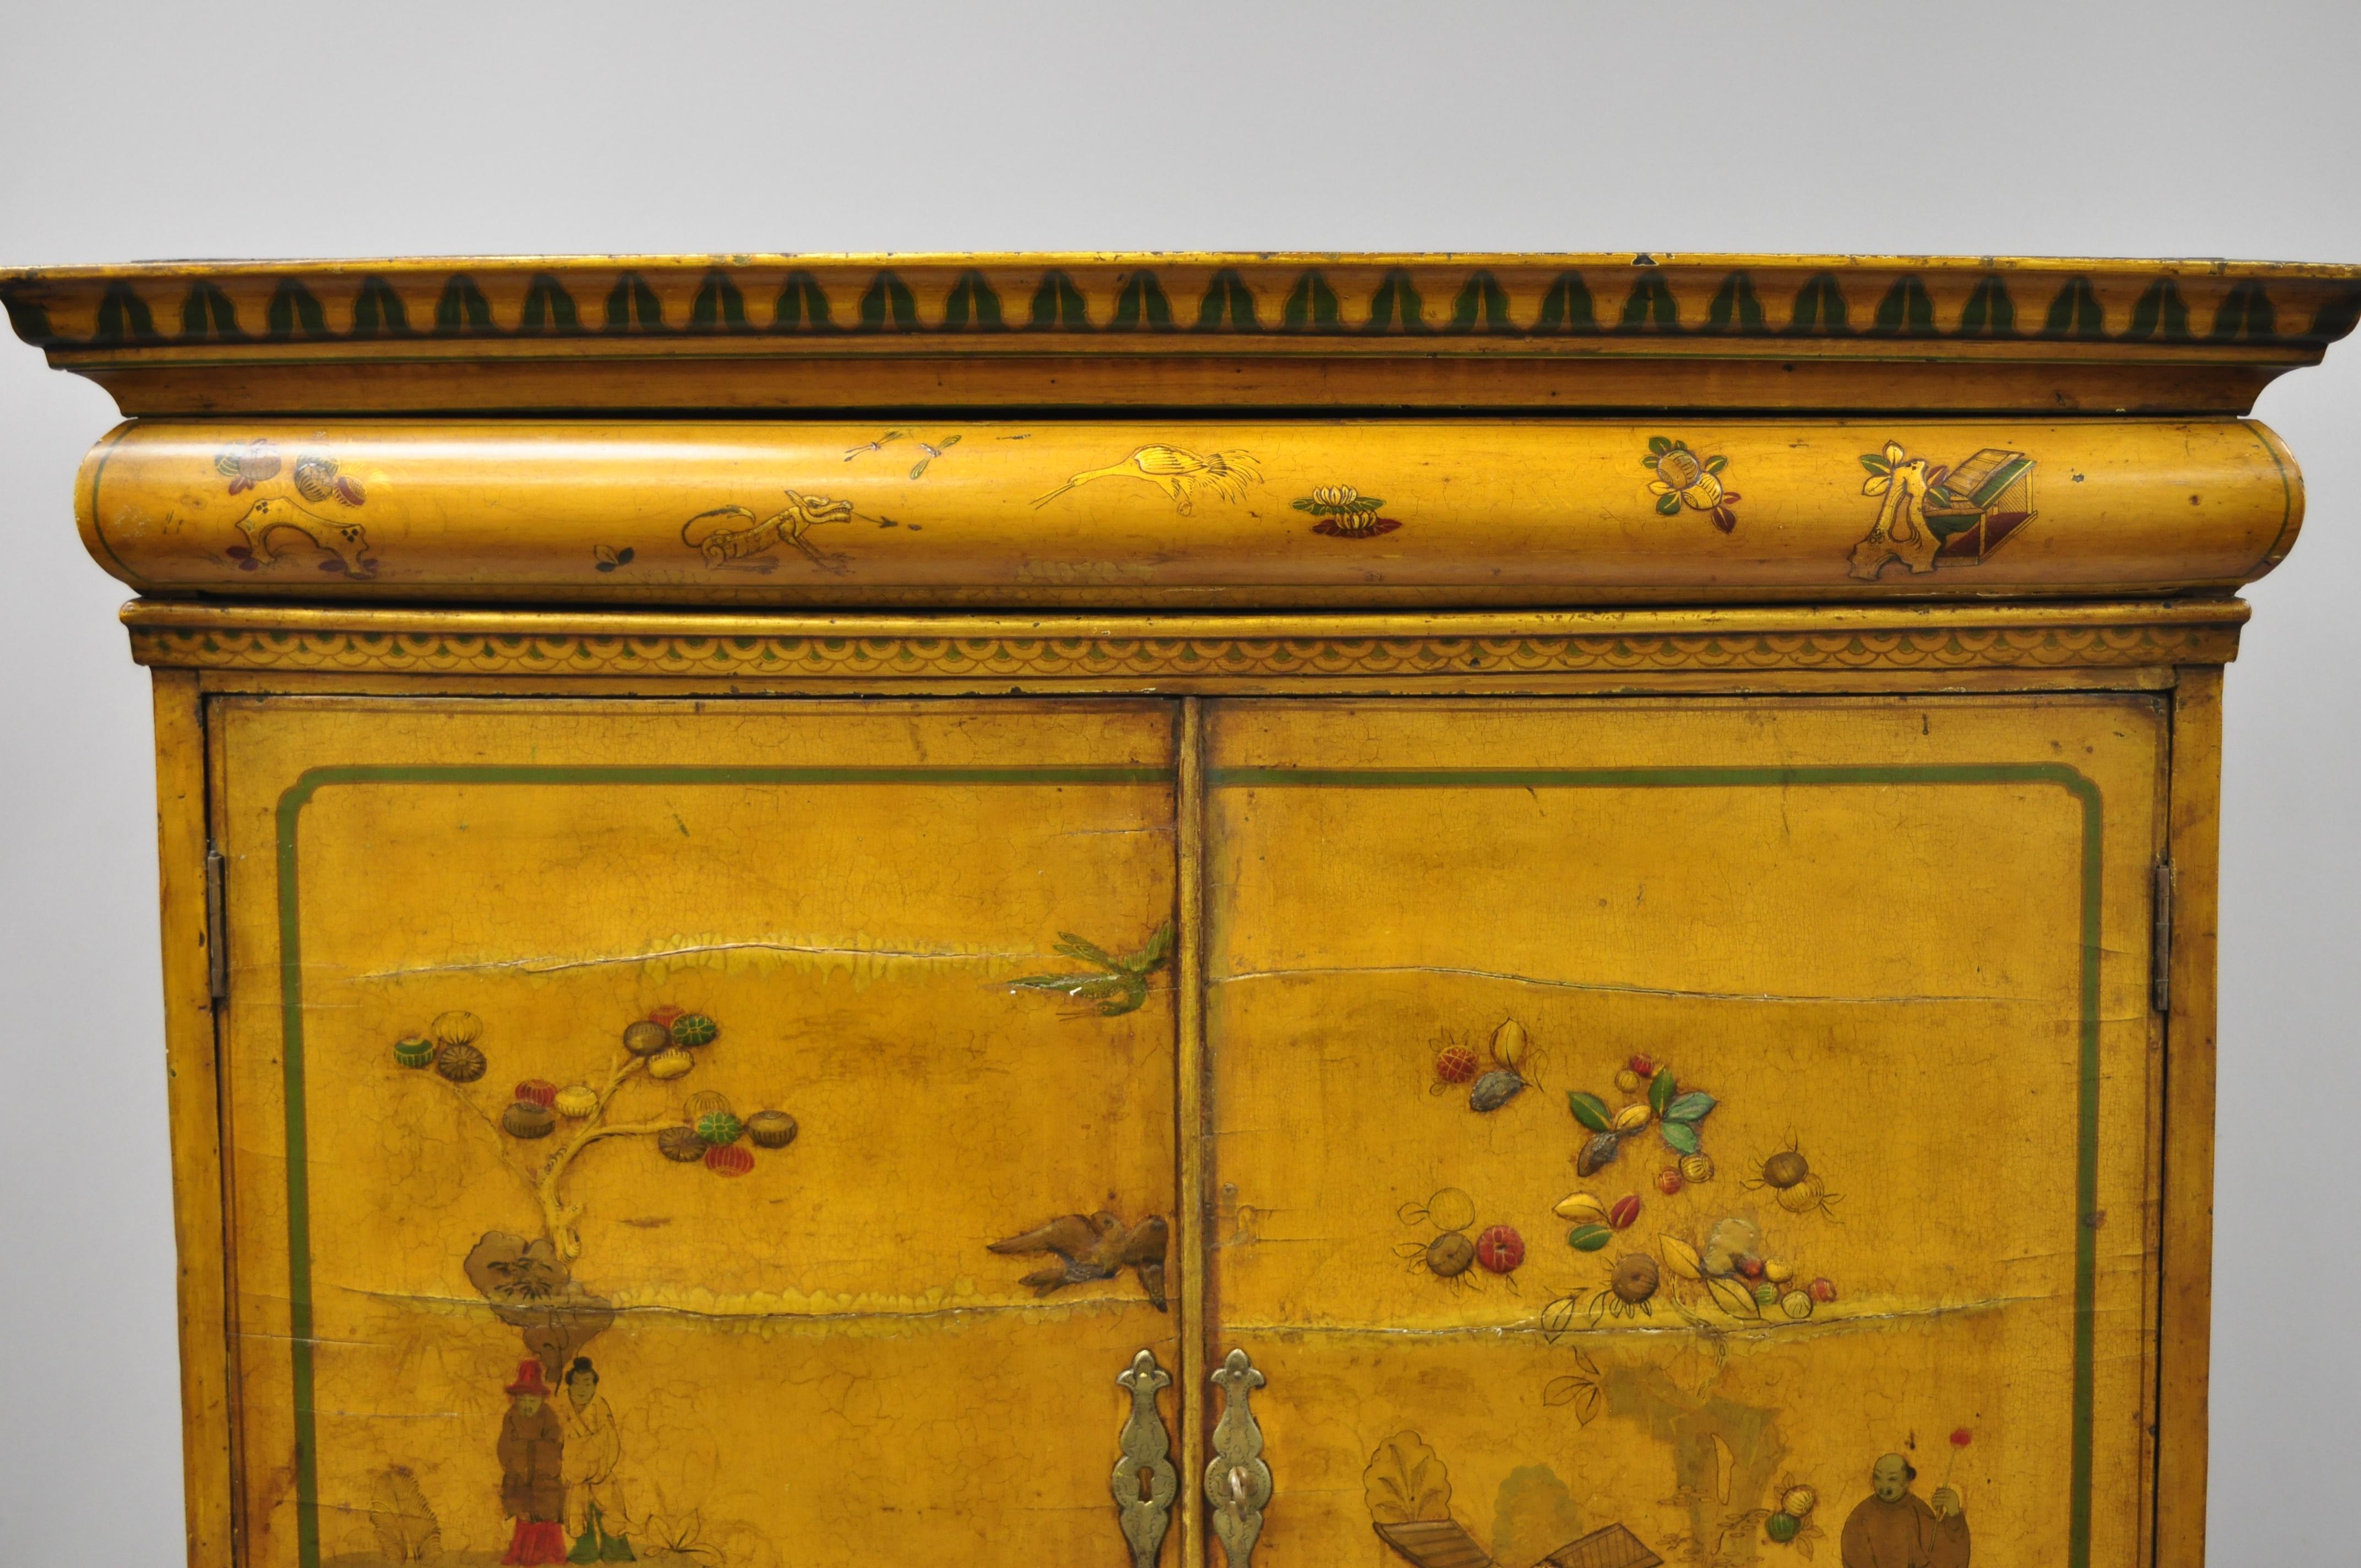 Antique 18th century William and Mary yellow lacquer polychrome Japanned parcel gilt cabinet. Item features hidden upper drawer, original yellow lacquer finish, bun feet, hand painted chinoiserie decoration, 2 part construction, working lock and key